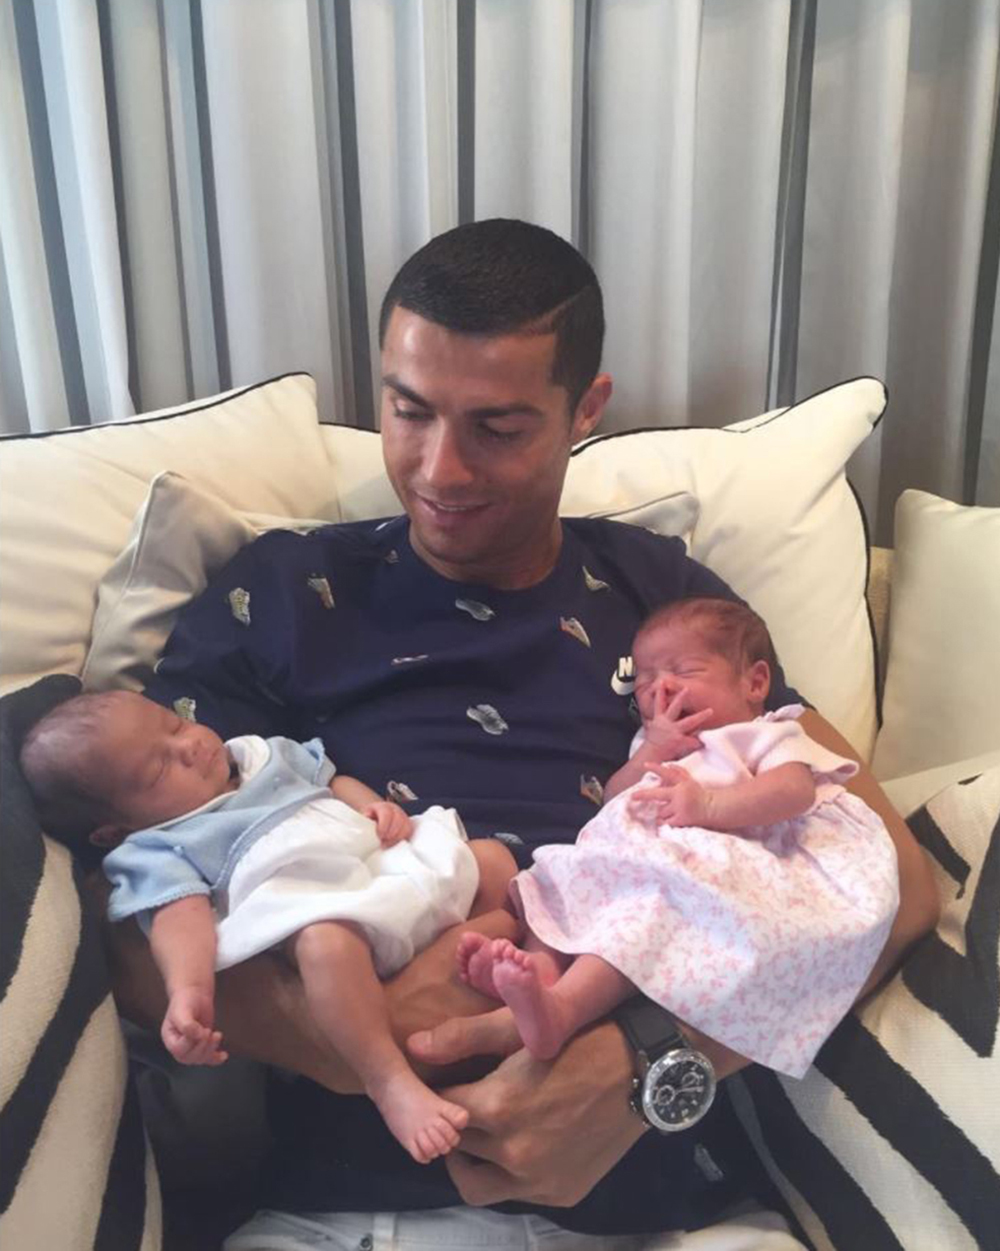 most-liked-instagrams-2017-cristiano-ronaldo-twins